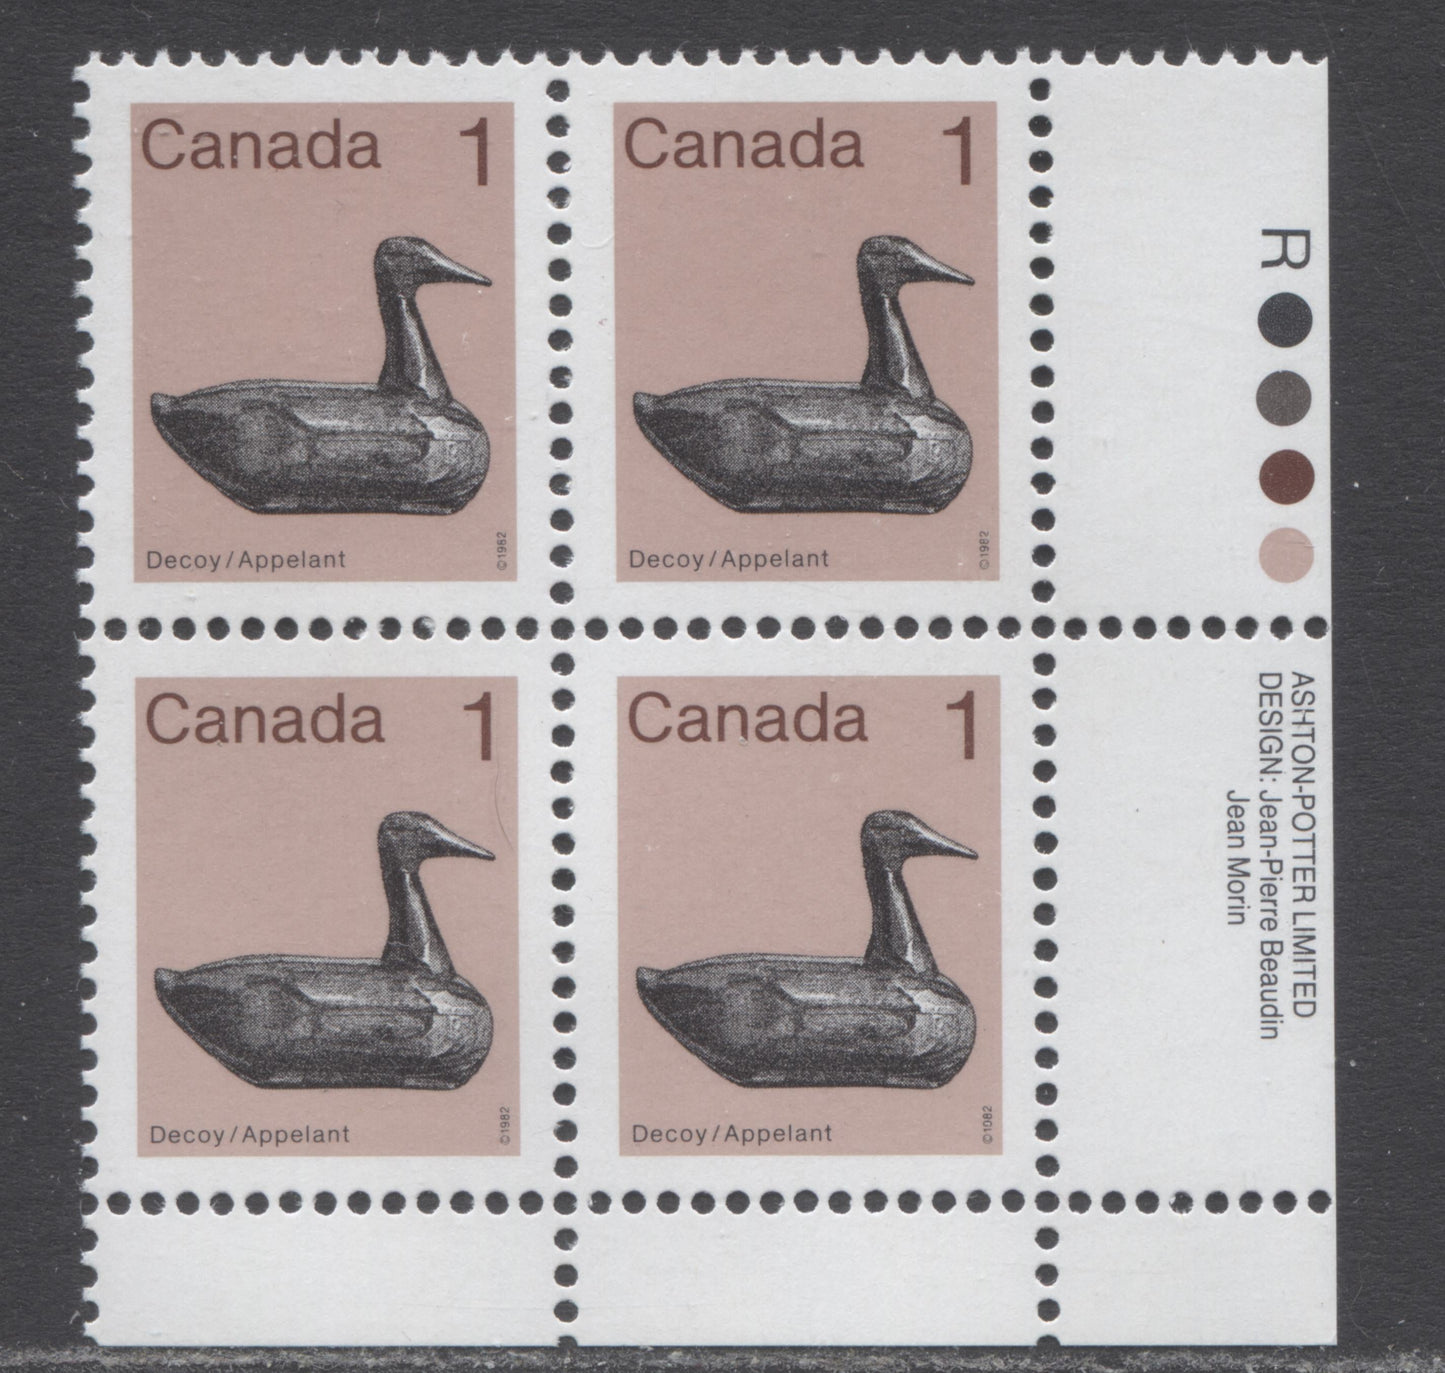 Lot 291 Canada #917v 1c Light Brown & Multicolored Decoy, 1982-1897 Low-Value Artifact Definitives, A VFNH LR Inscription Block Of 4 With Hair On Duck's Head Variety On DF/LF3-fl Paper